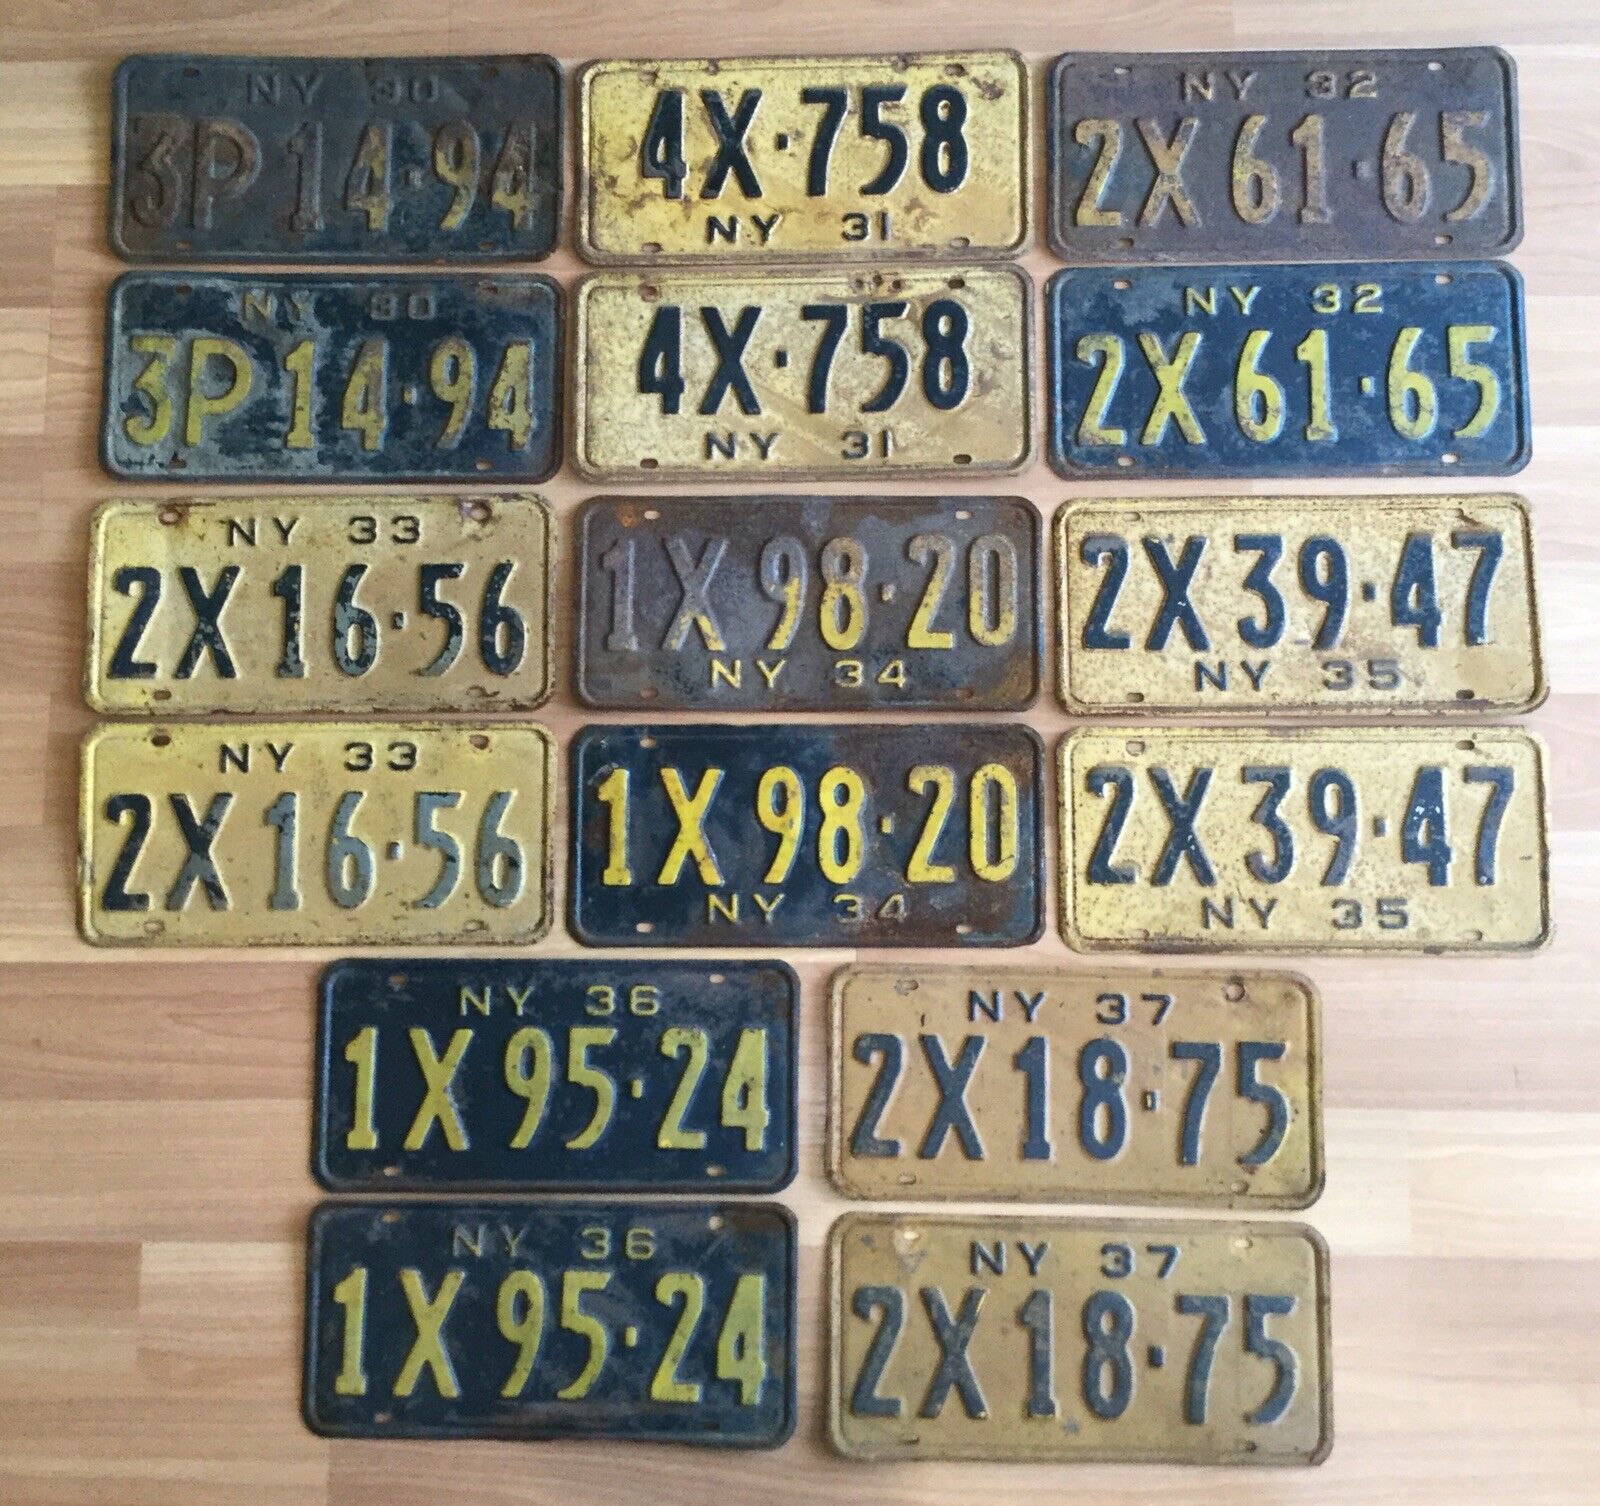 OLD VTG ANTIQUE 1930-1937 NY LICENSE PLATE METAL AUTOMOBILE CAR 8 PAIR LOT OF 16